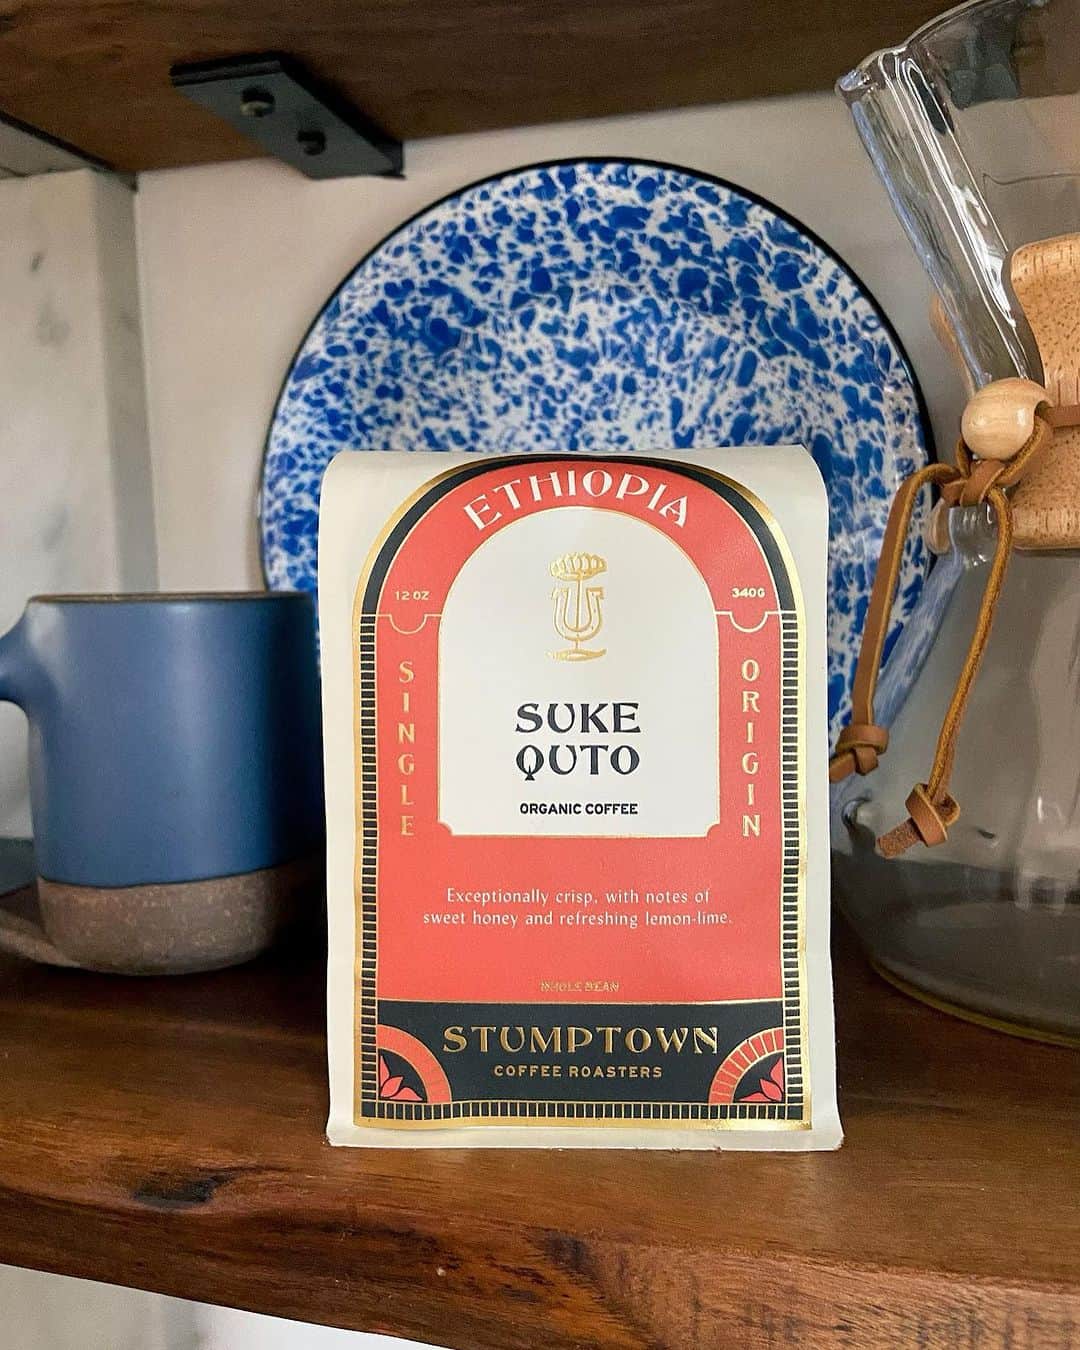 Stumptown Coffee Roastersのインスタグラム：「We’re welcoming back Ethiopia Suke Quto to the menu – exceptionally crisp, with notes of sweet honey and refreshing lemon-lime. And, this coffee delivers more than just amazing taste. 🍯🍋✨  Set on sweeping slopes between mountains and plateaus near the village of Kumure in the Guji Zone, the farmland of Suke Quto has volcanic, loamy soil rich with nutrients ideal for producing exquisite coffee.  To producer Tesfaye Bekele, Suke Quto is always a conservation effort first and a coffee business second. What started as an idea to grow and process environmentally friendly coffees to help sustain his local community has grown to inspire fellow producers and support outlying communities in the region.」